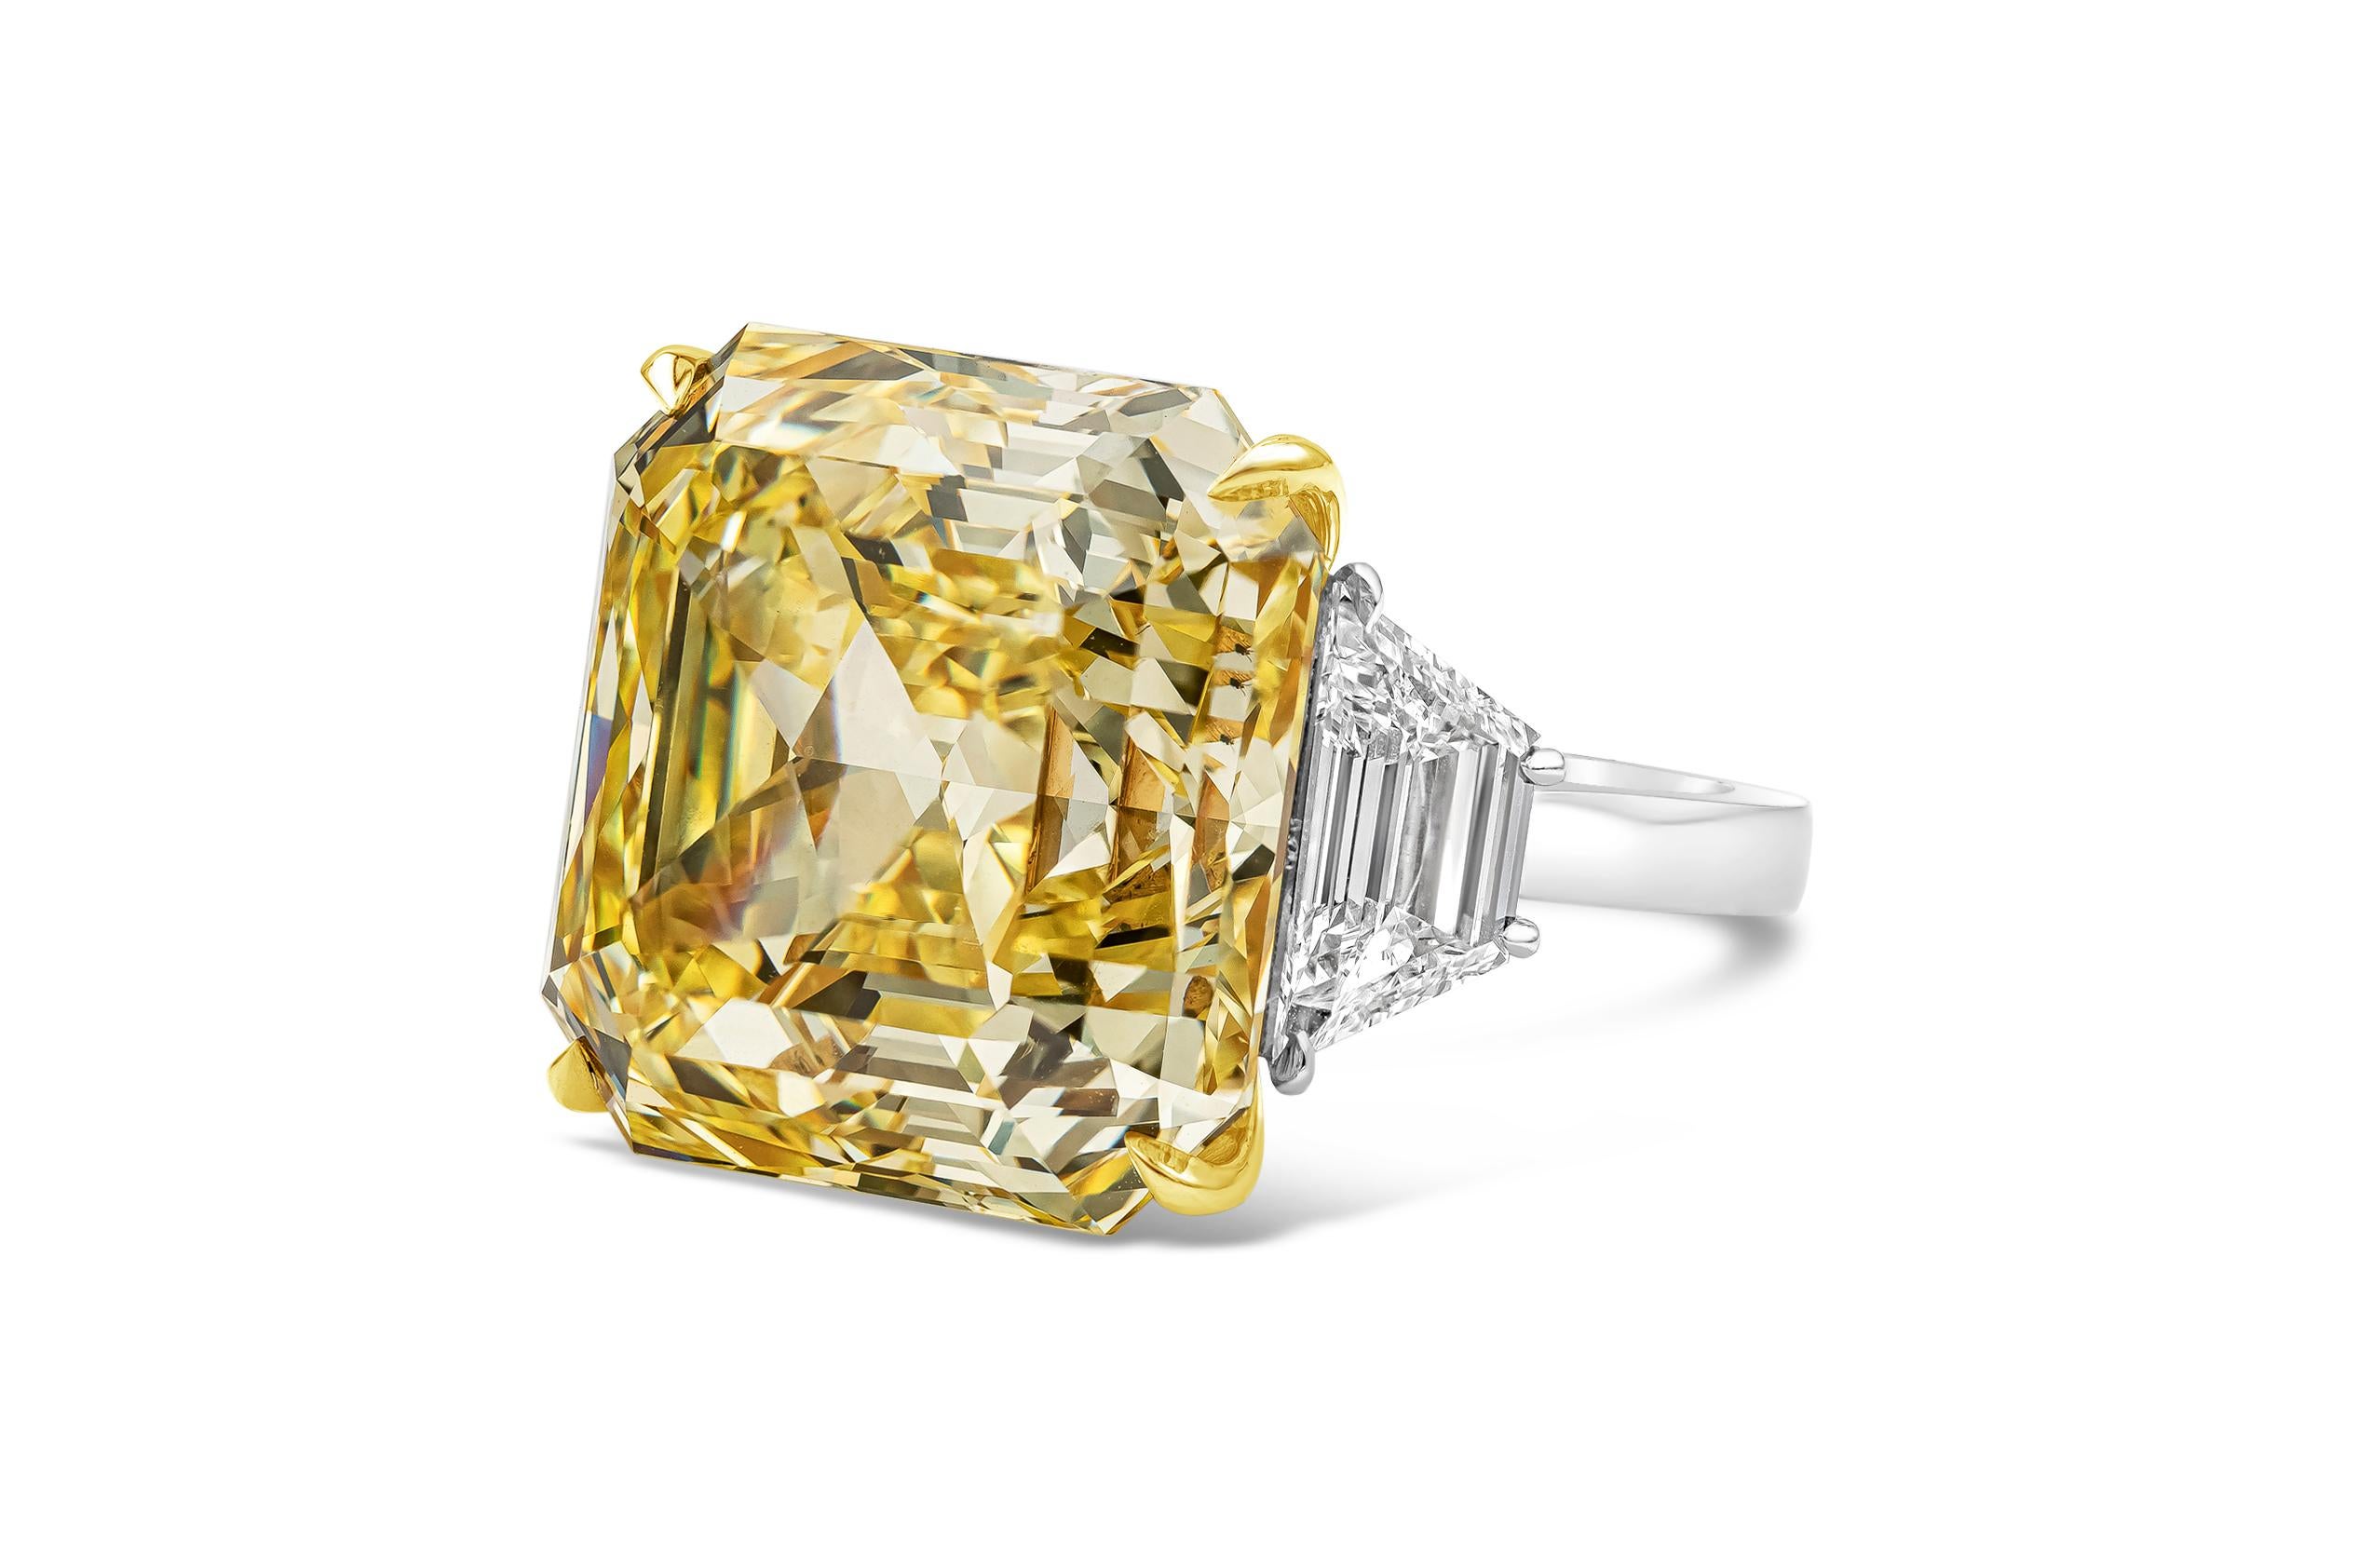 A very rare piece of jewelry that will catch everyone's eye. Features a stunning 30.02 carat asscher cut diamond that GIA certified as fancy intense yellow color and VVS2 clarity. Elegantly set in an 18k yellow gold basket, the center stone is